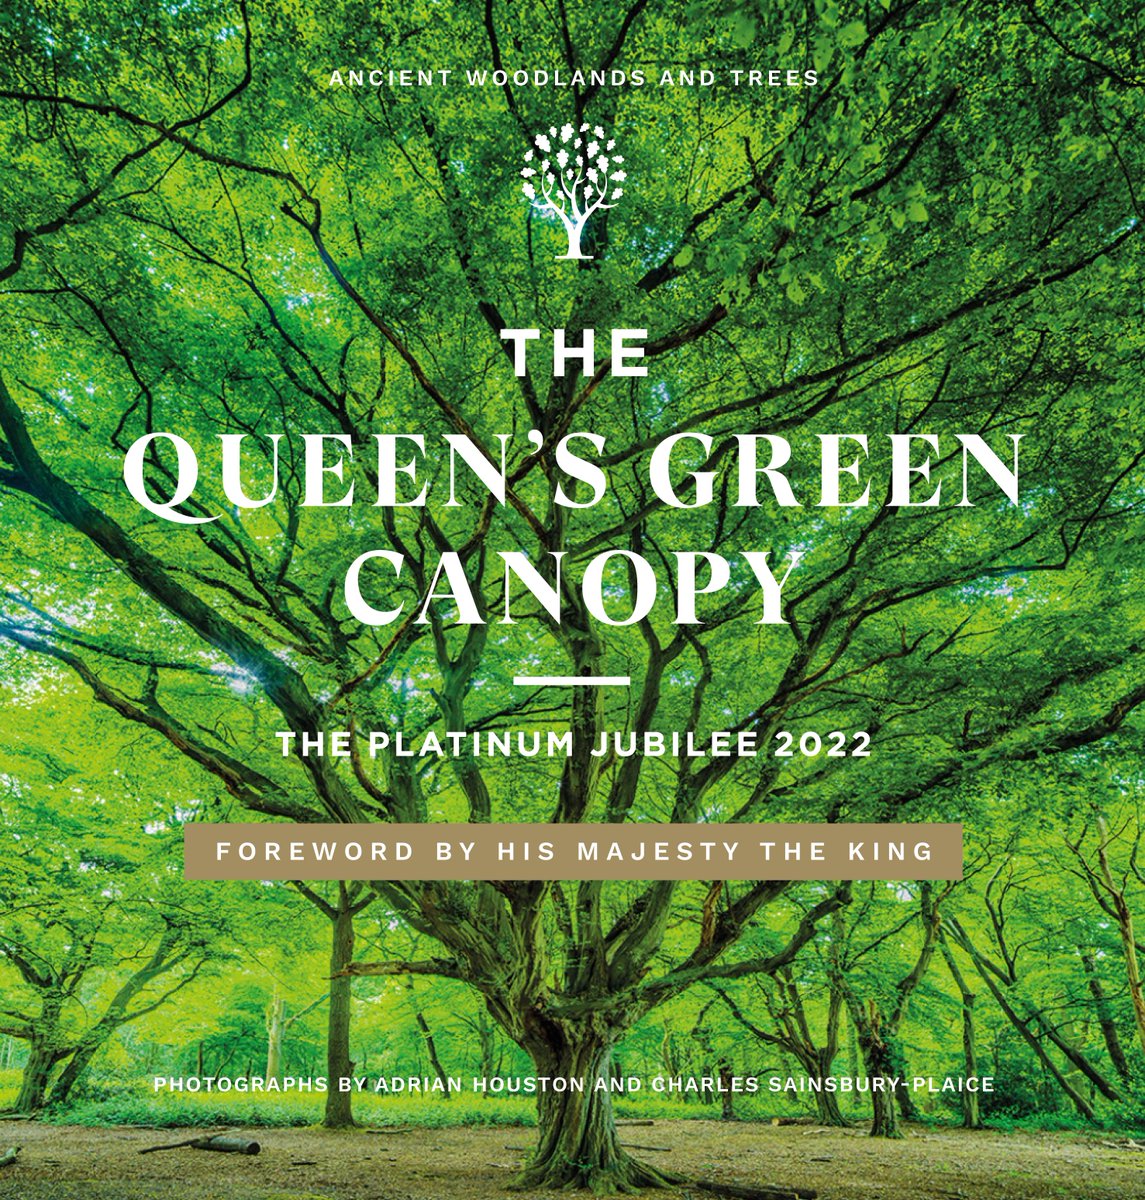 The #queensgreencanopy book is available to pre-order!🌳 With stunning photographs by Adrian Houston & Charles Sainsbury-Plaice & inspiring words from QGC supporters, the book celebrates the Ancient Canopy dedicated to Queen Elizabeth❤️ Follow the link: bit.ly/3ZdfF0y